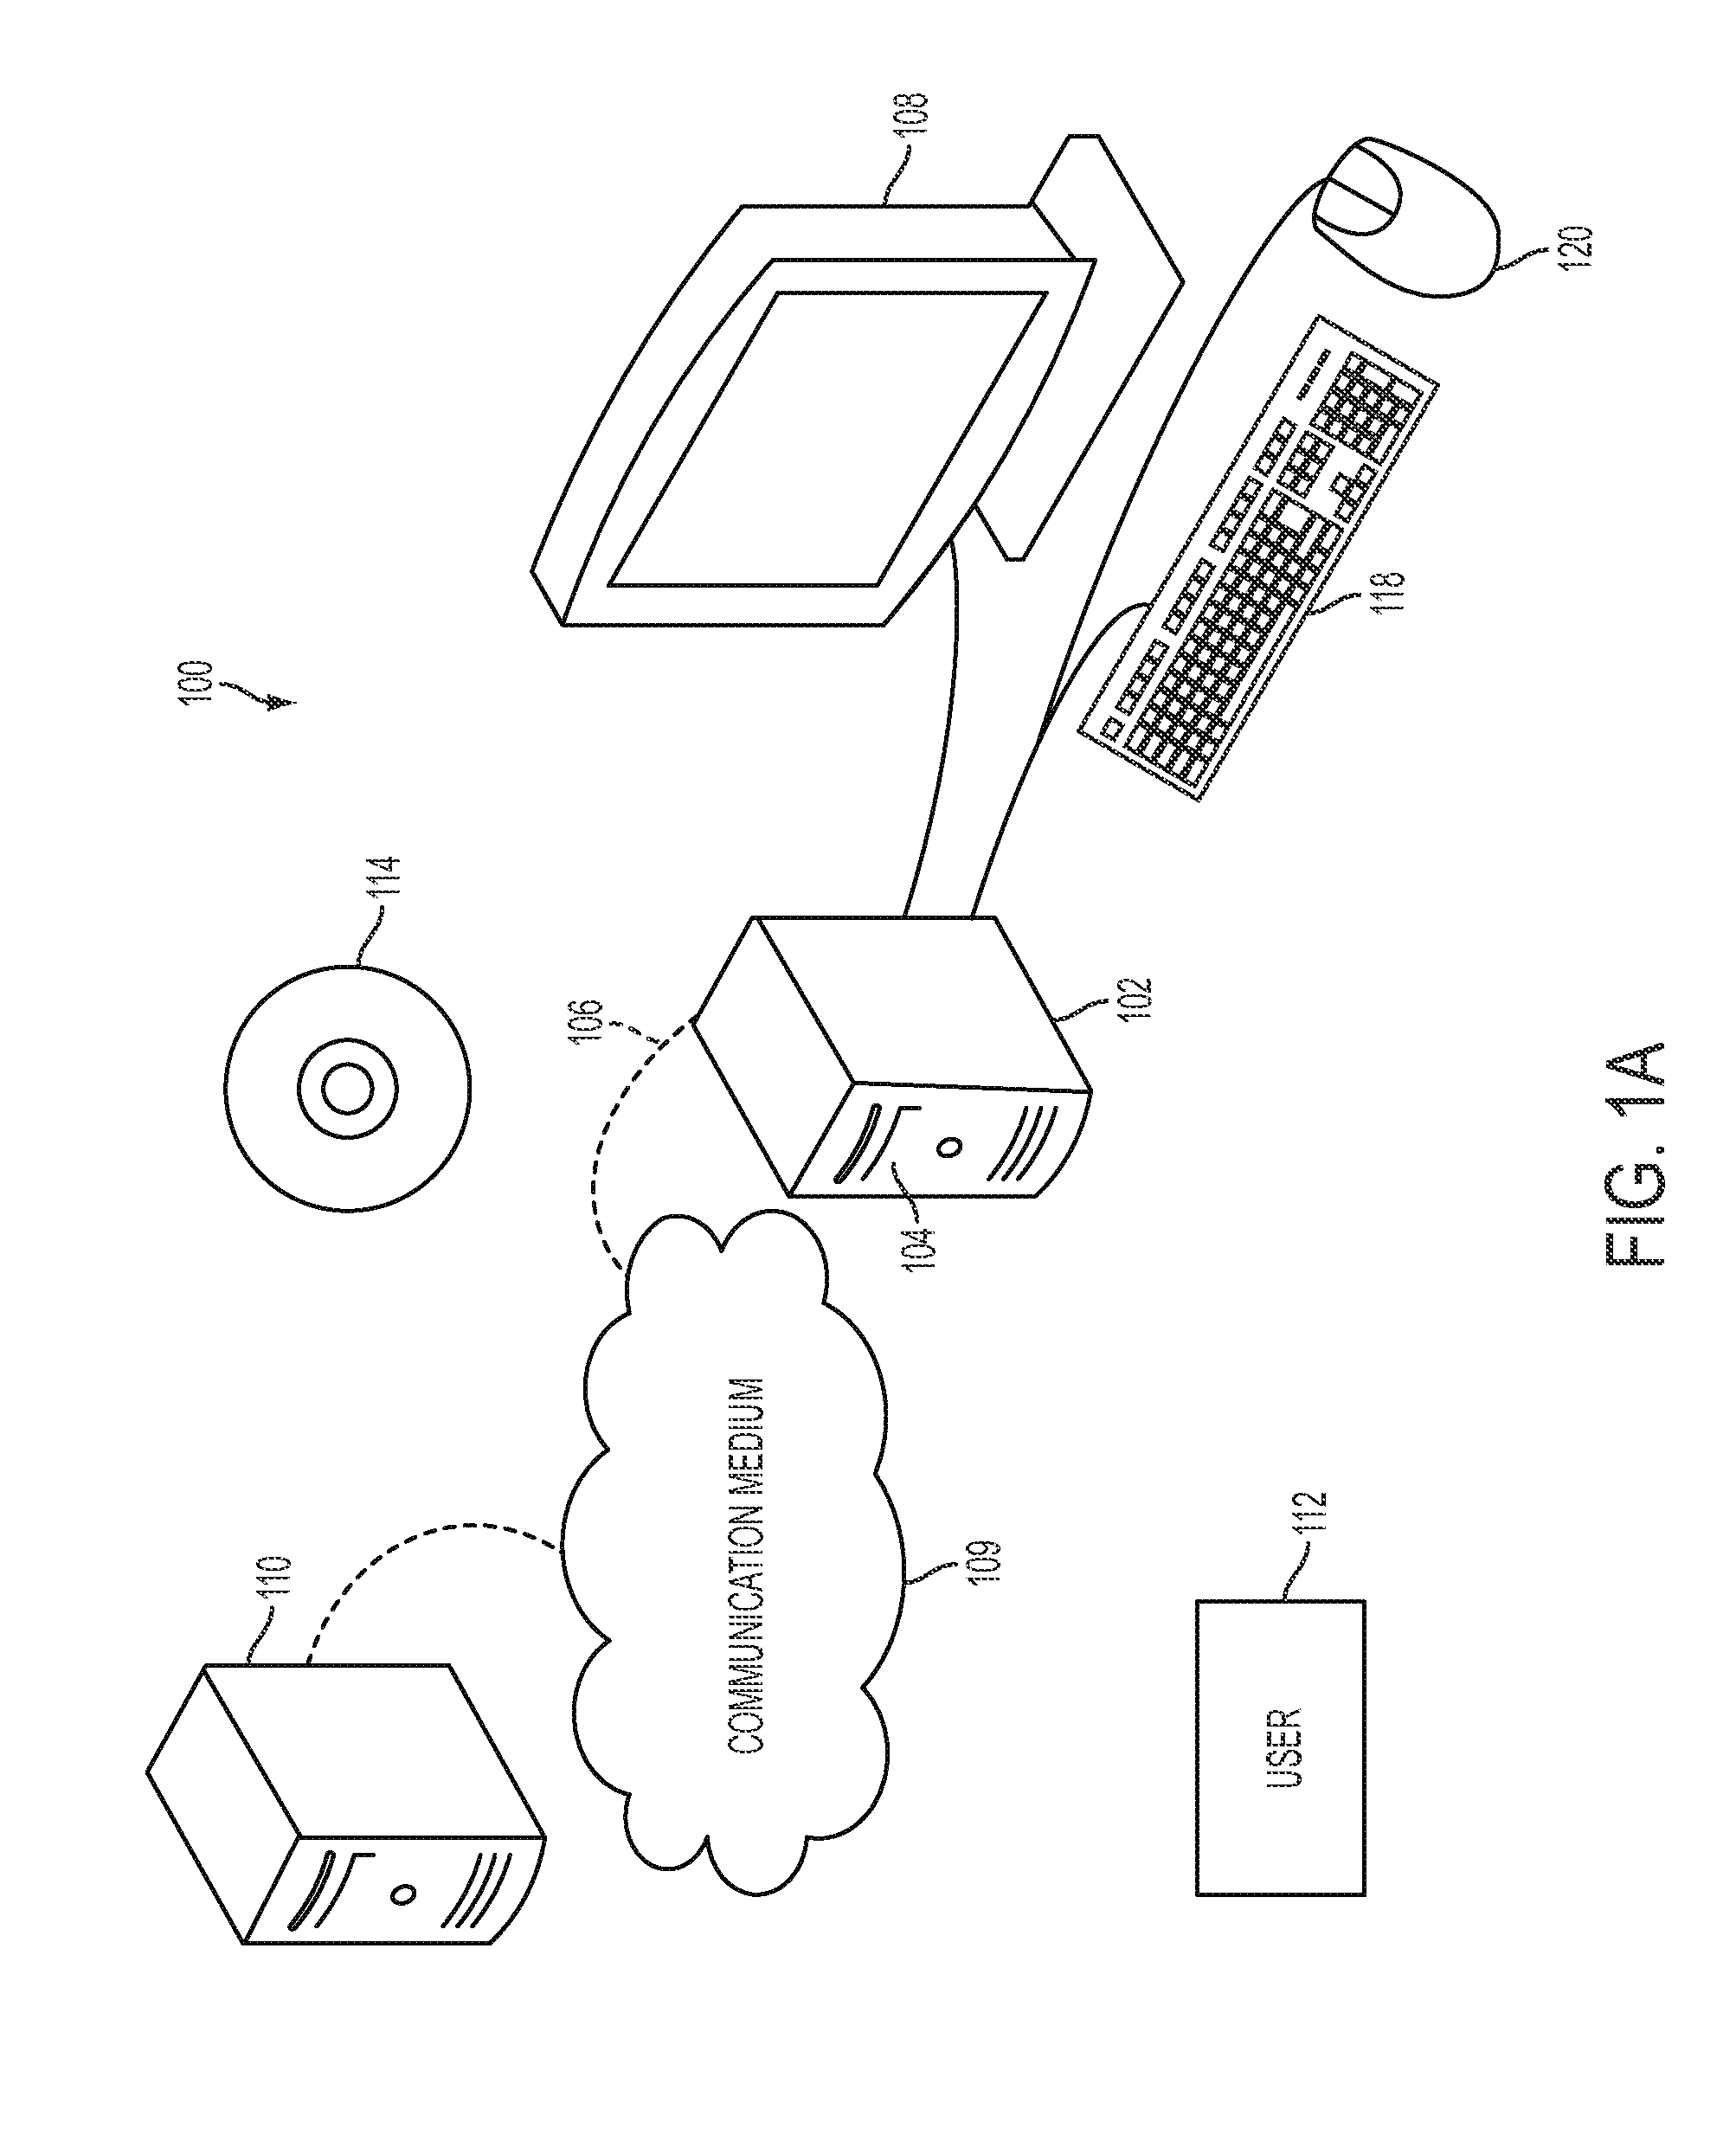 Systems and methods for targeting specific benefits with cognitive training